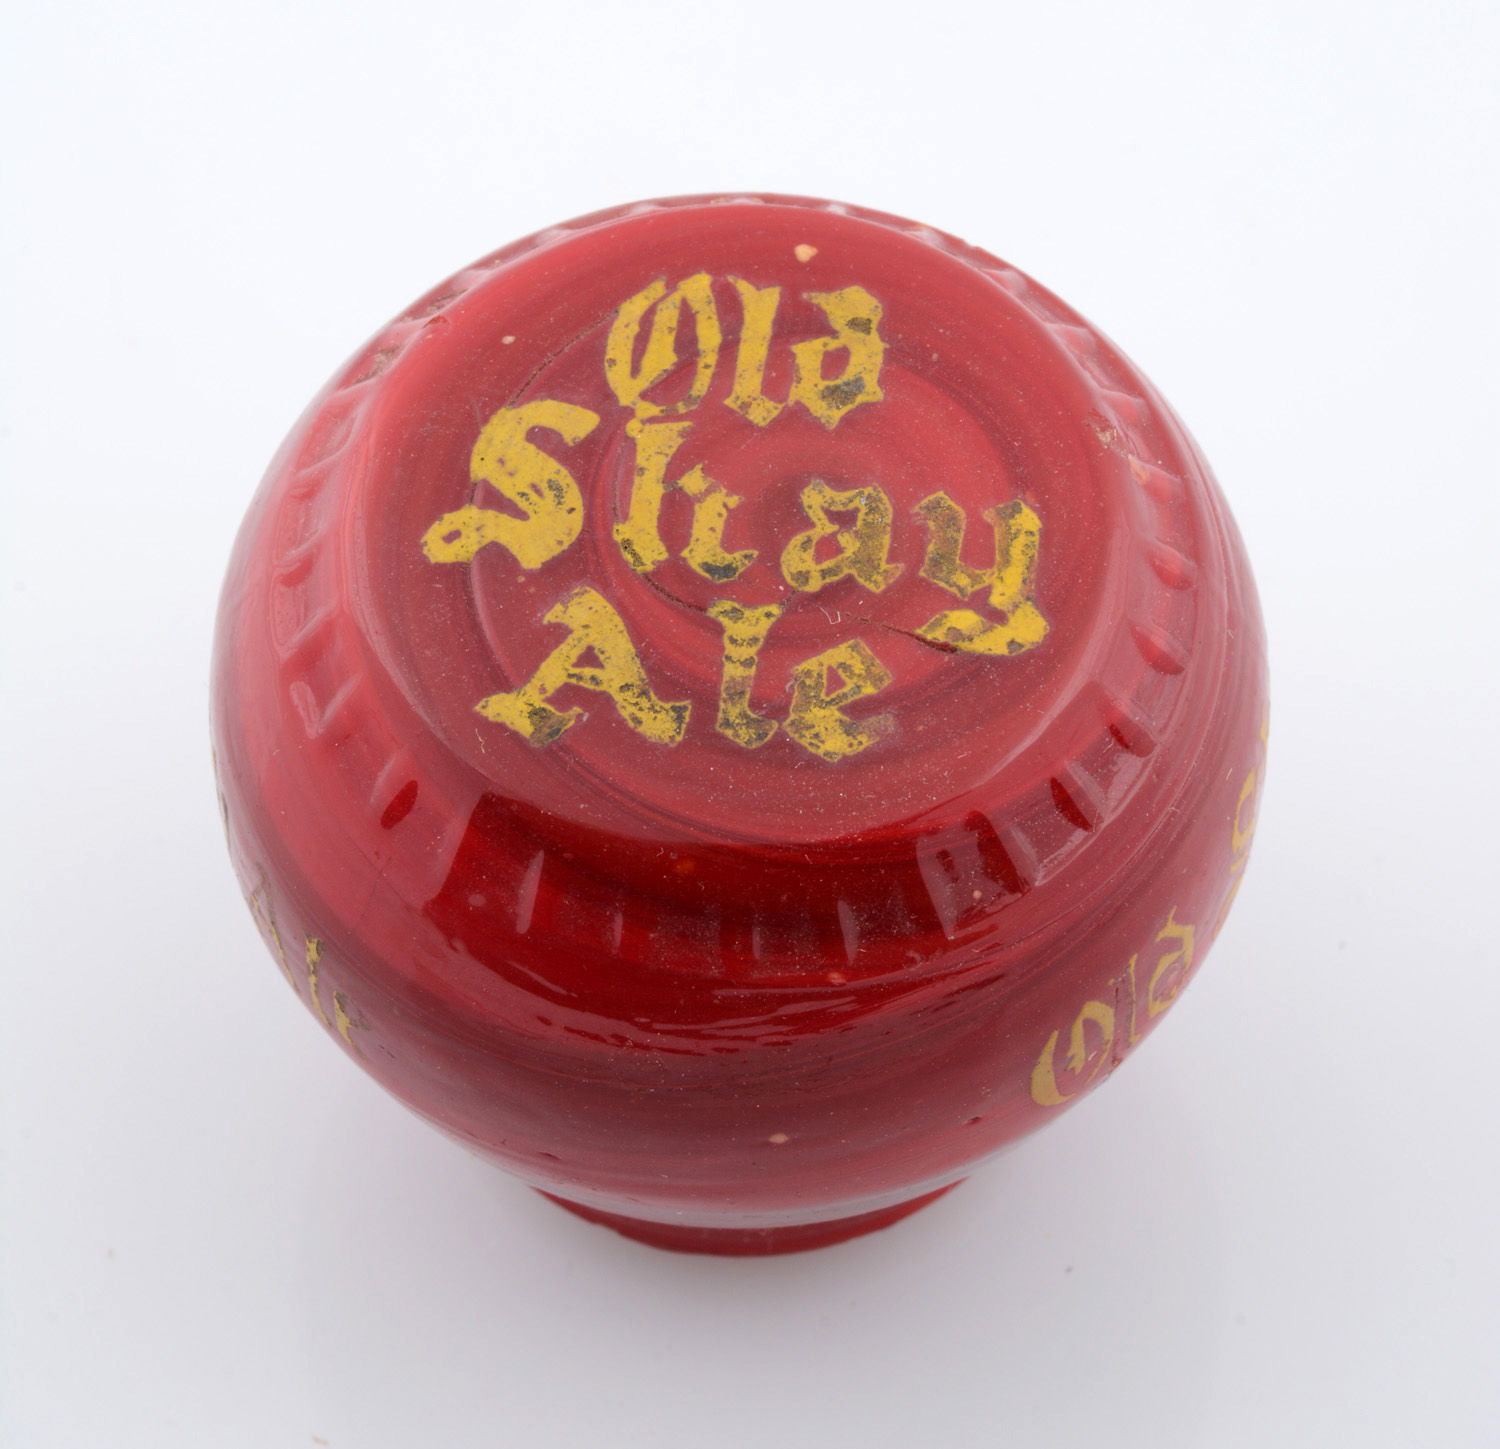 Old Shay Ale Newman Glass Tap Knob, estimated at $400-600.